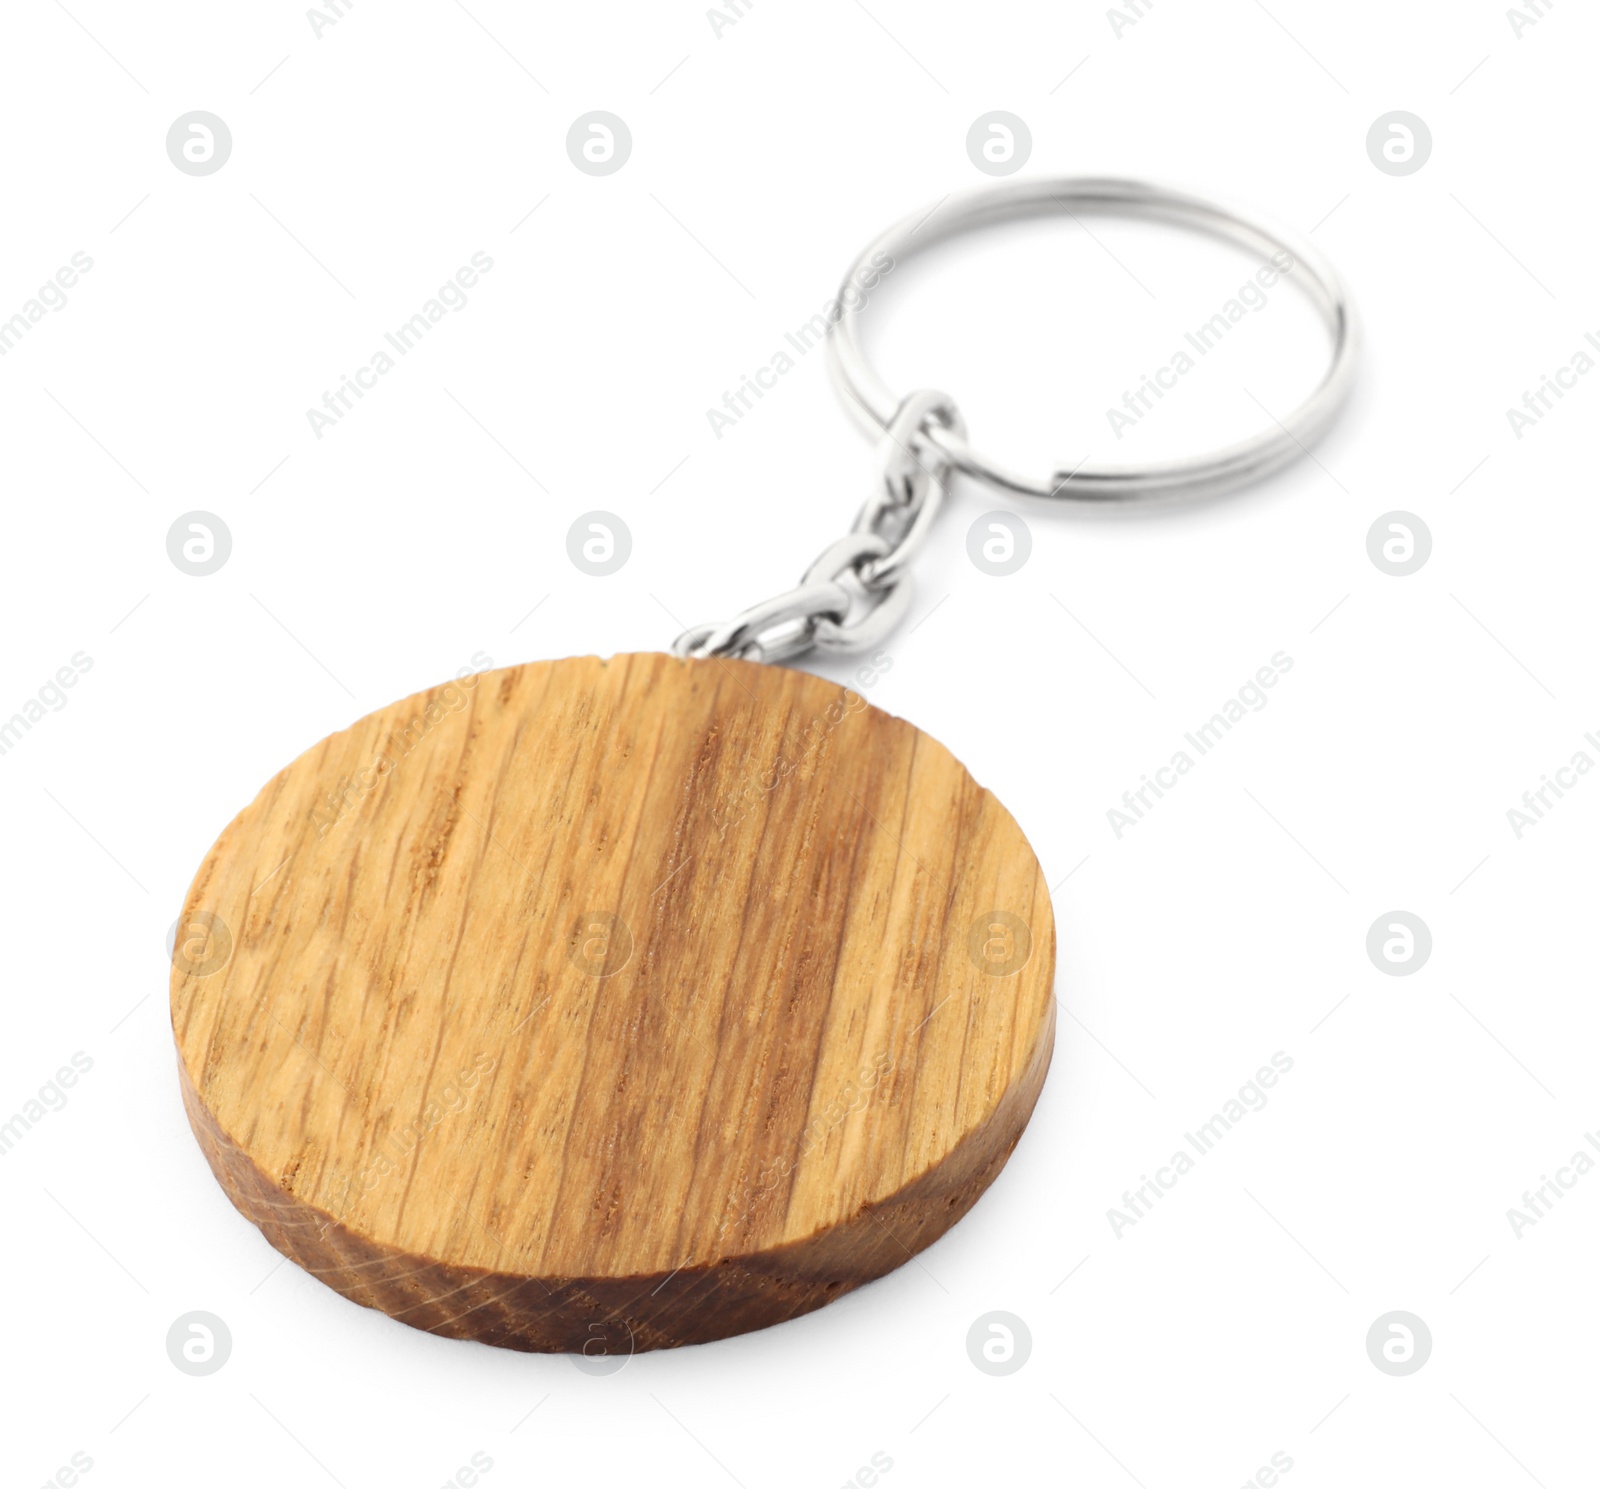 Photo of Wooden keychain in shape of smiley face isolated on white